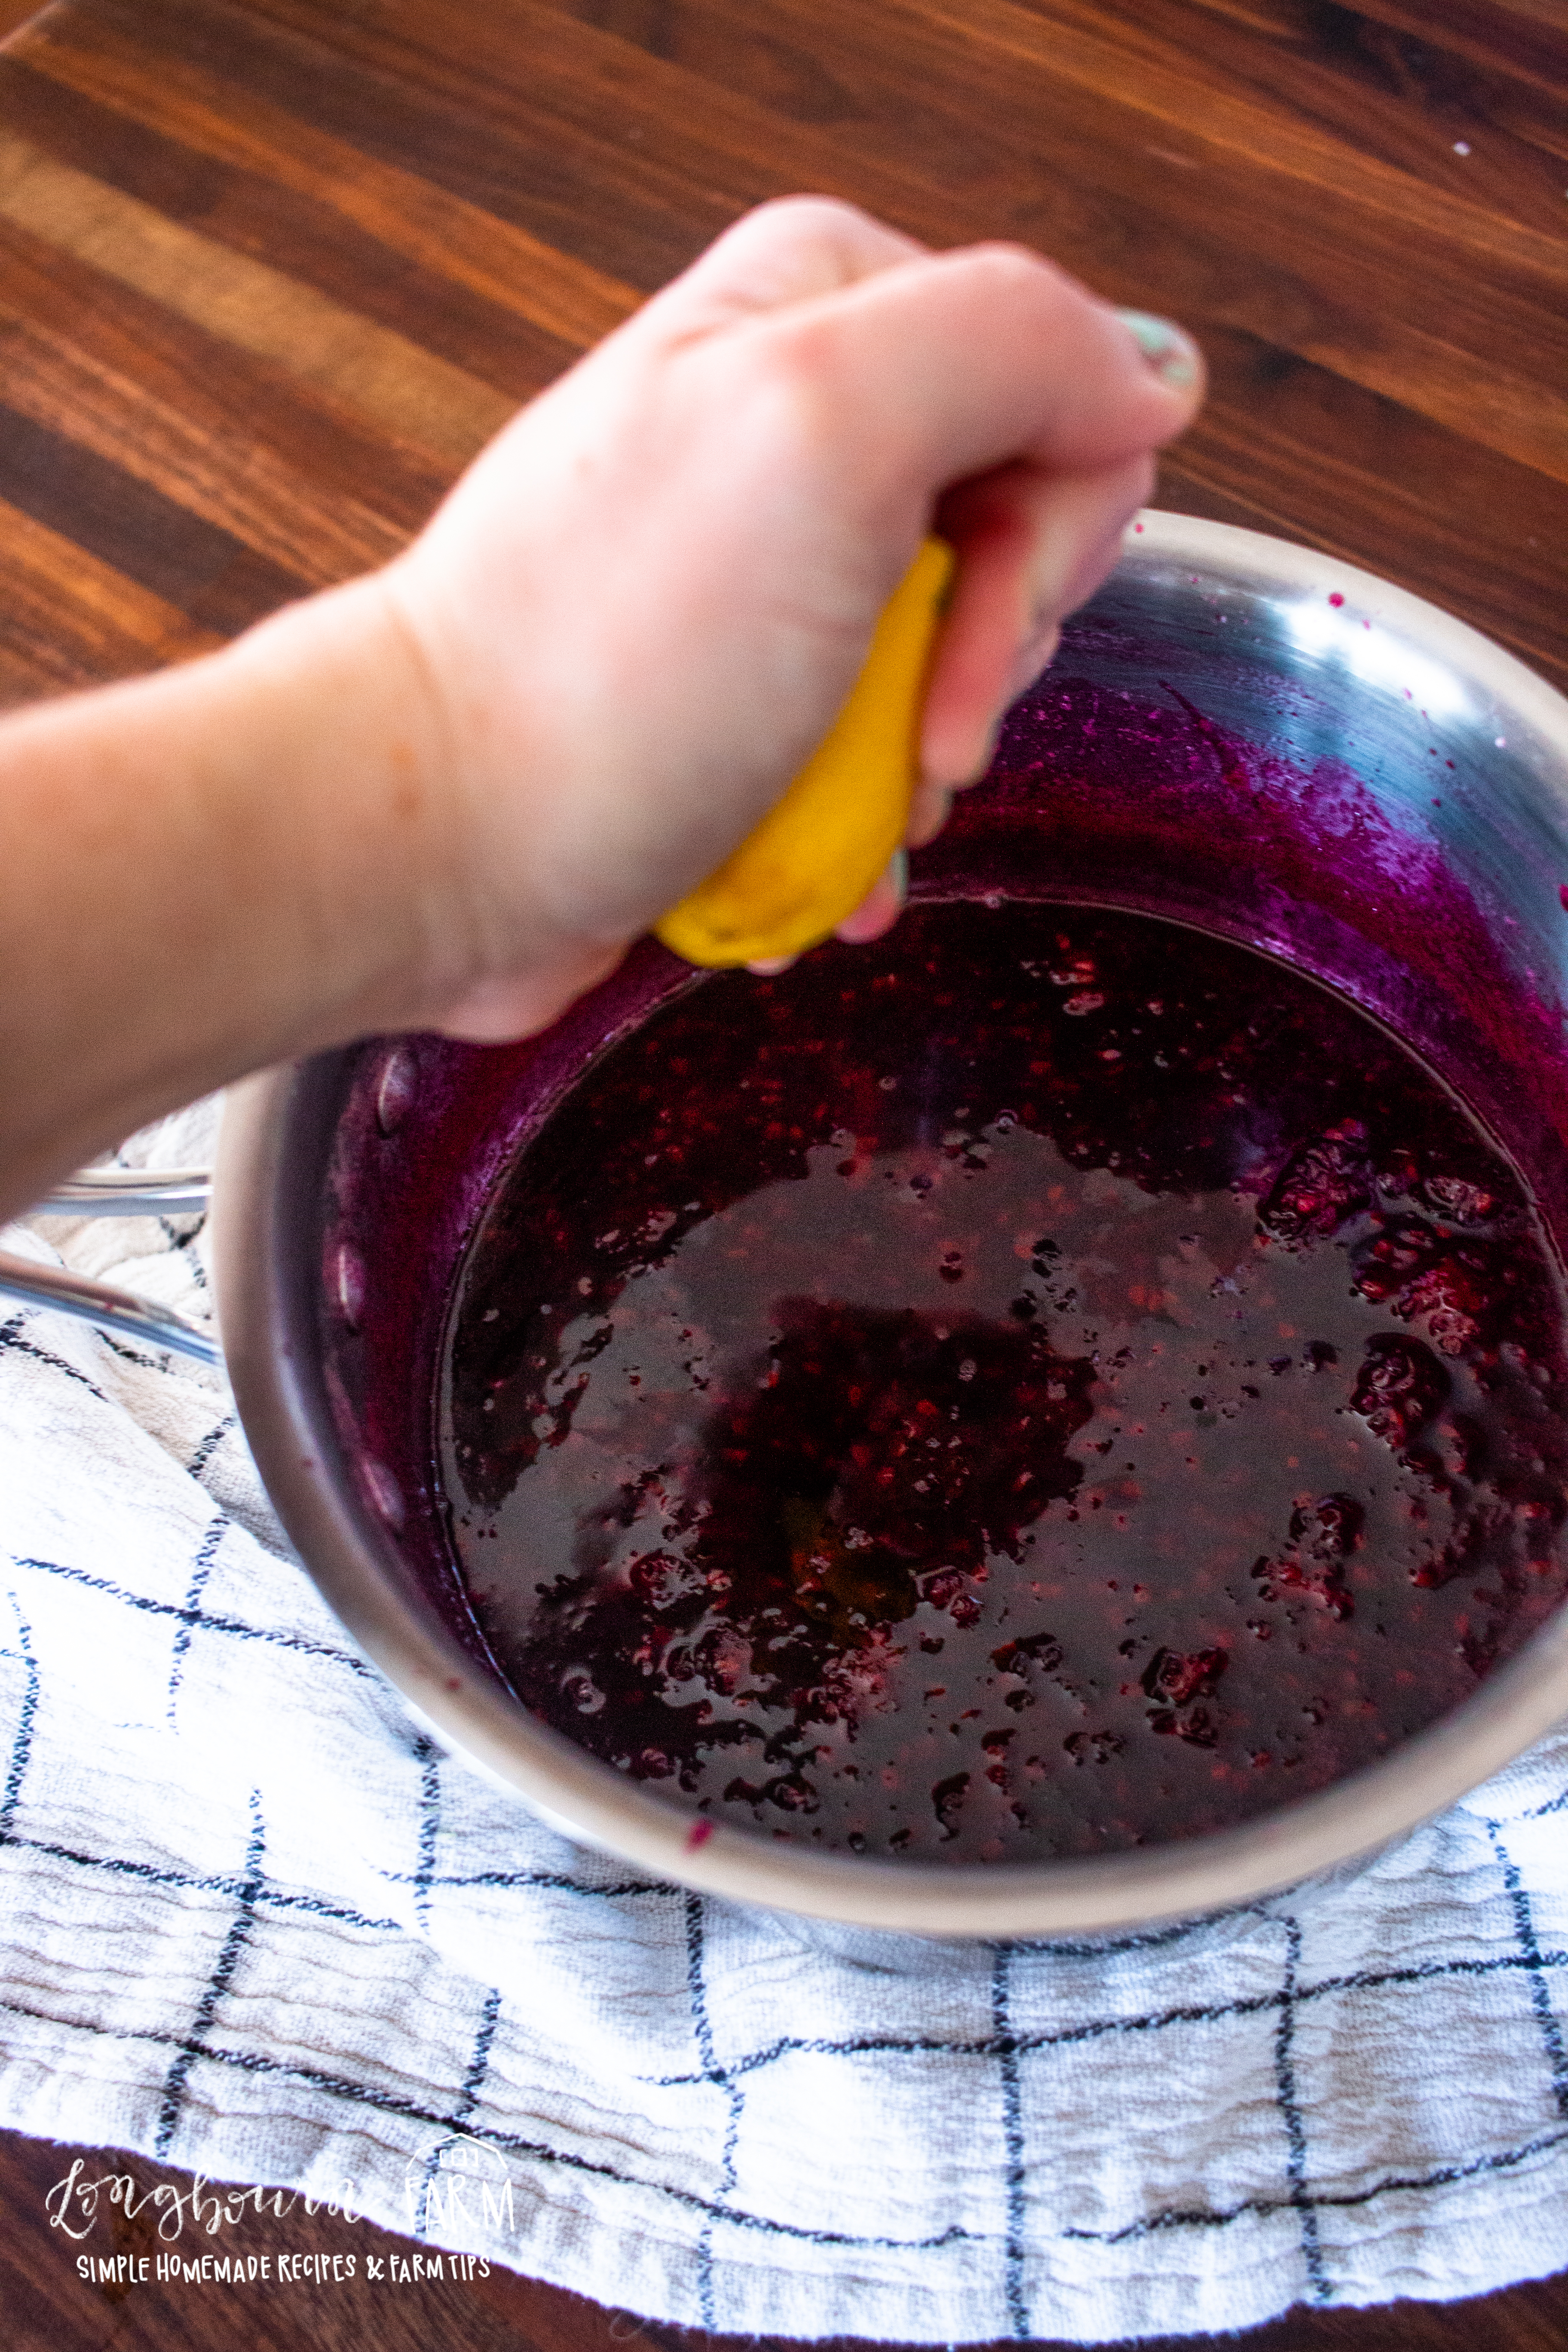 squeezing lemon into the pot of blackberry syrup